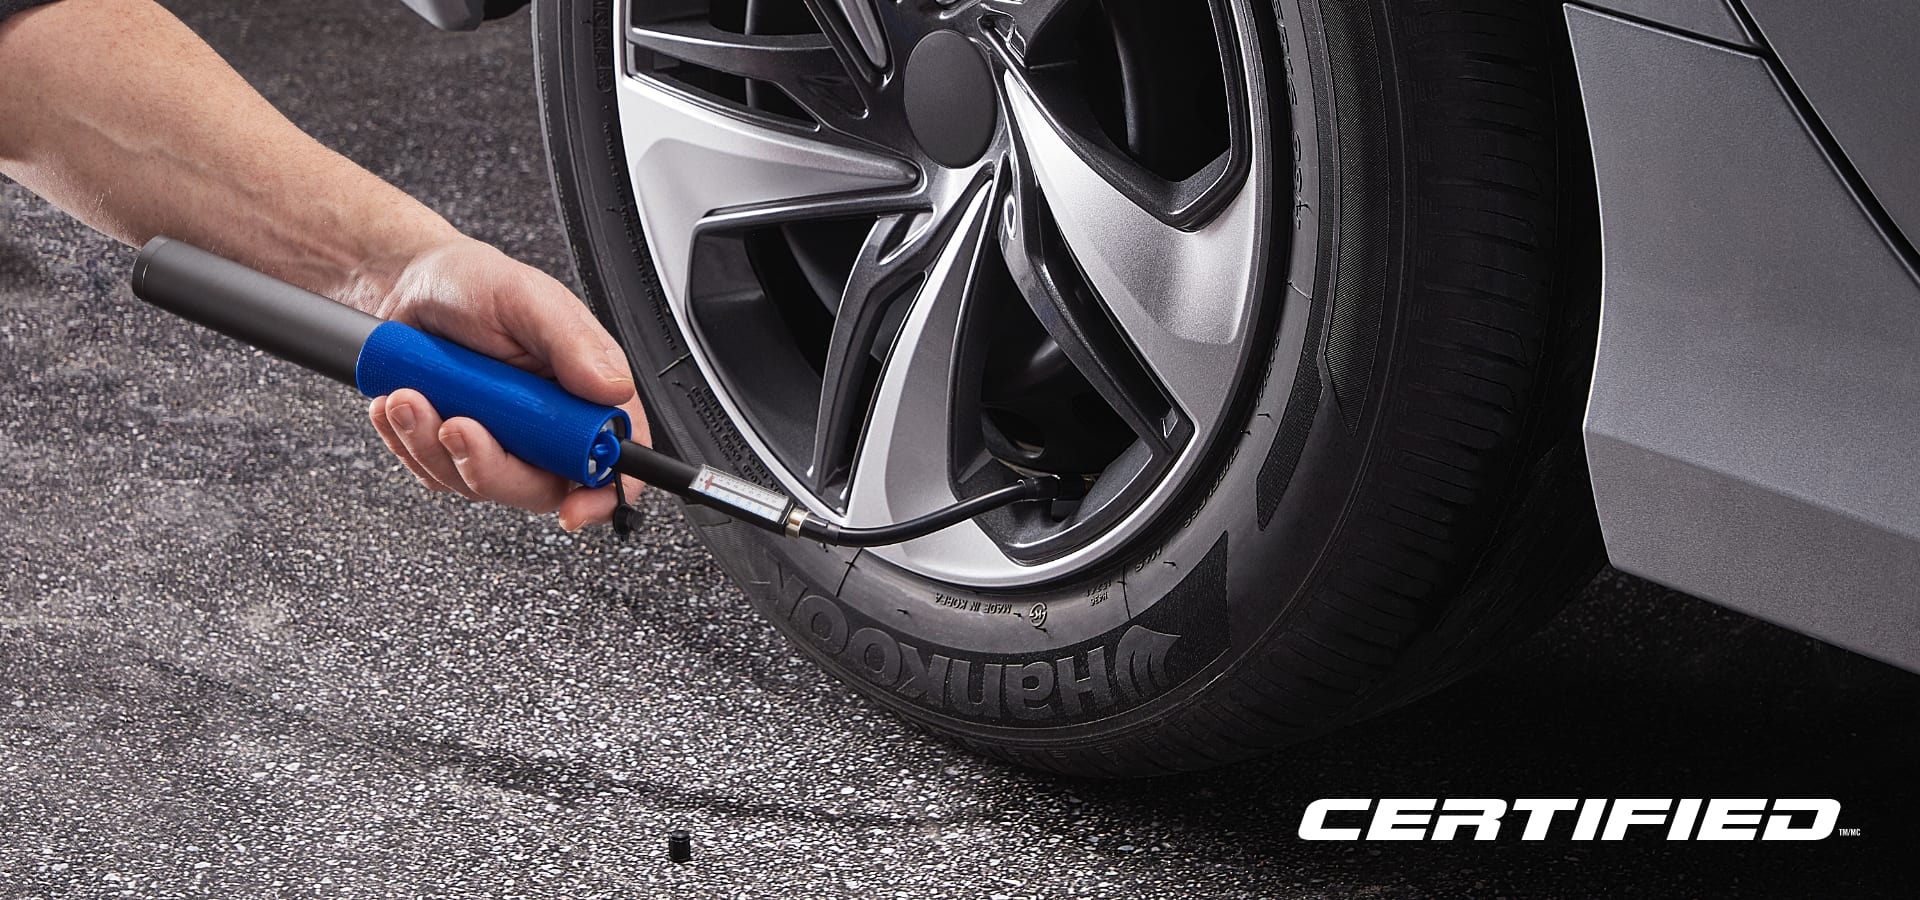 Person using a tool to check tire pressure.